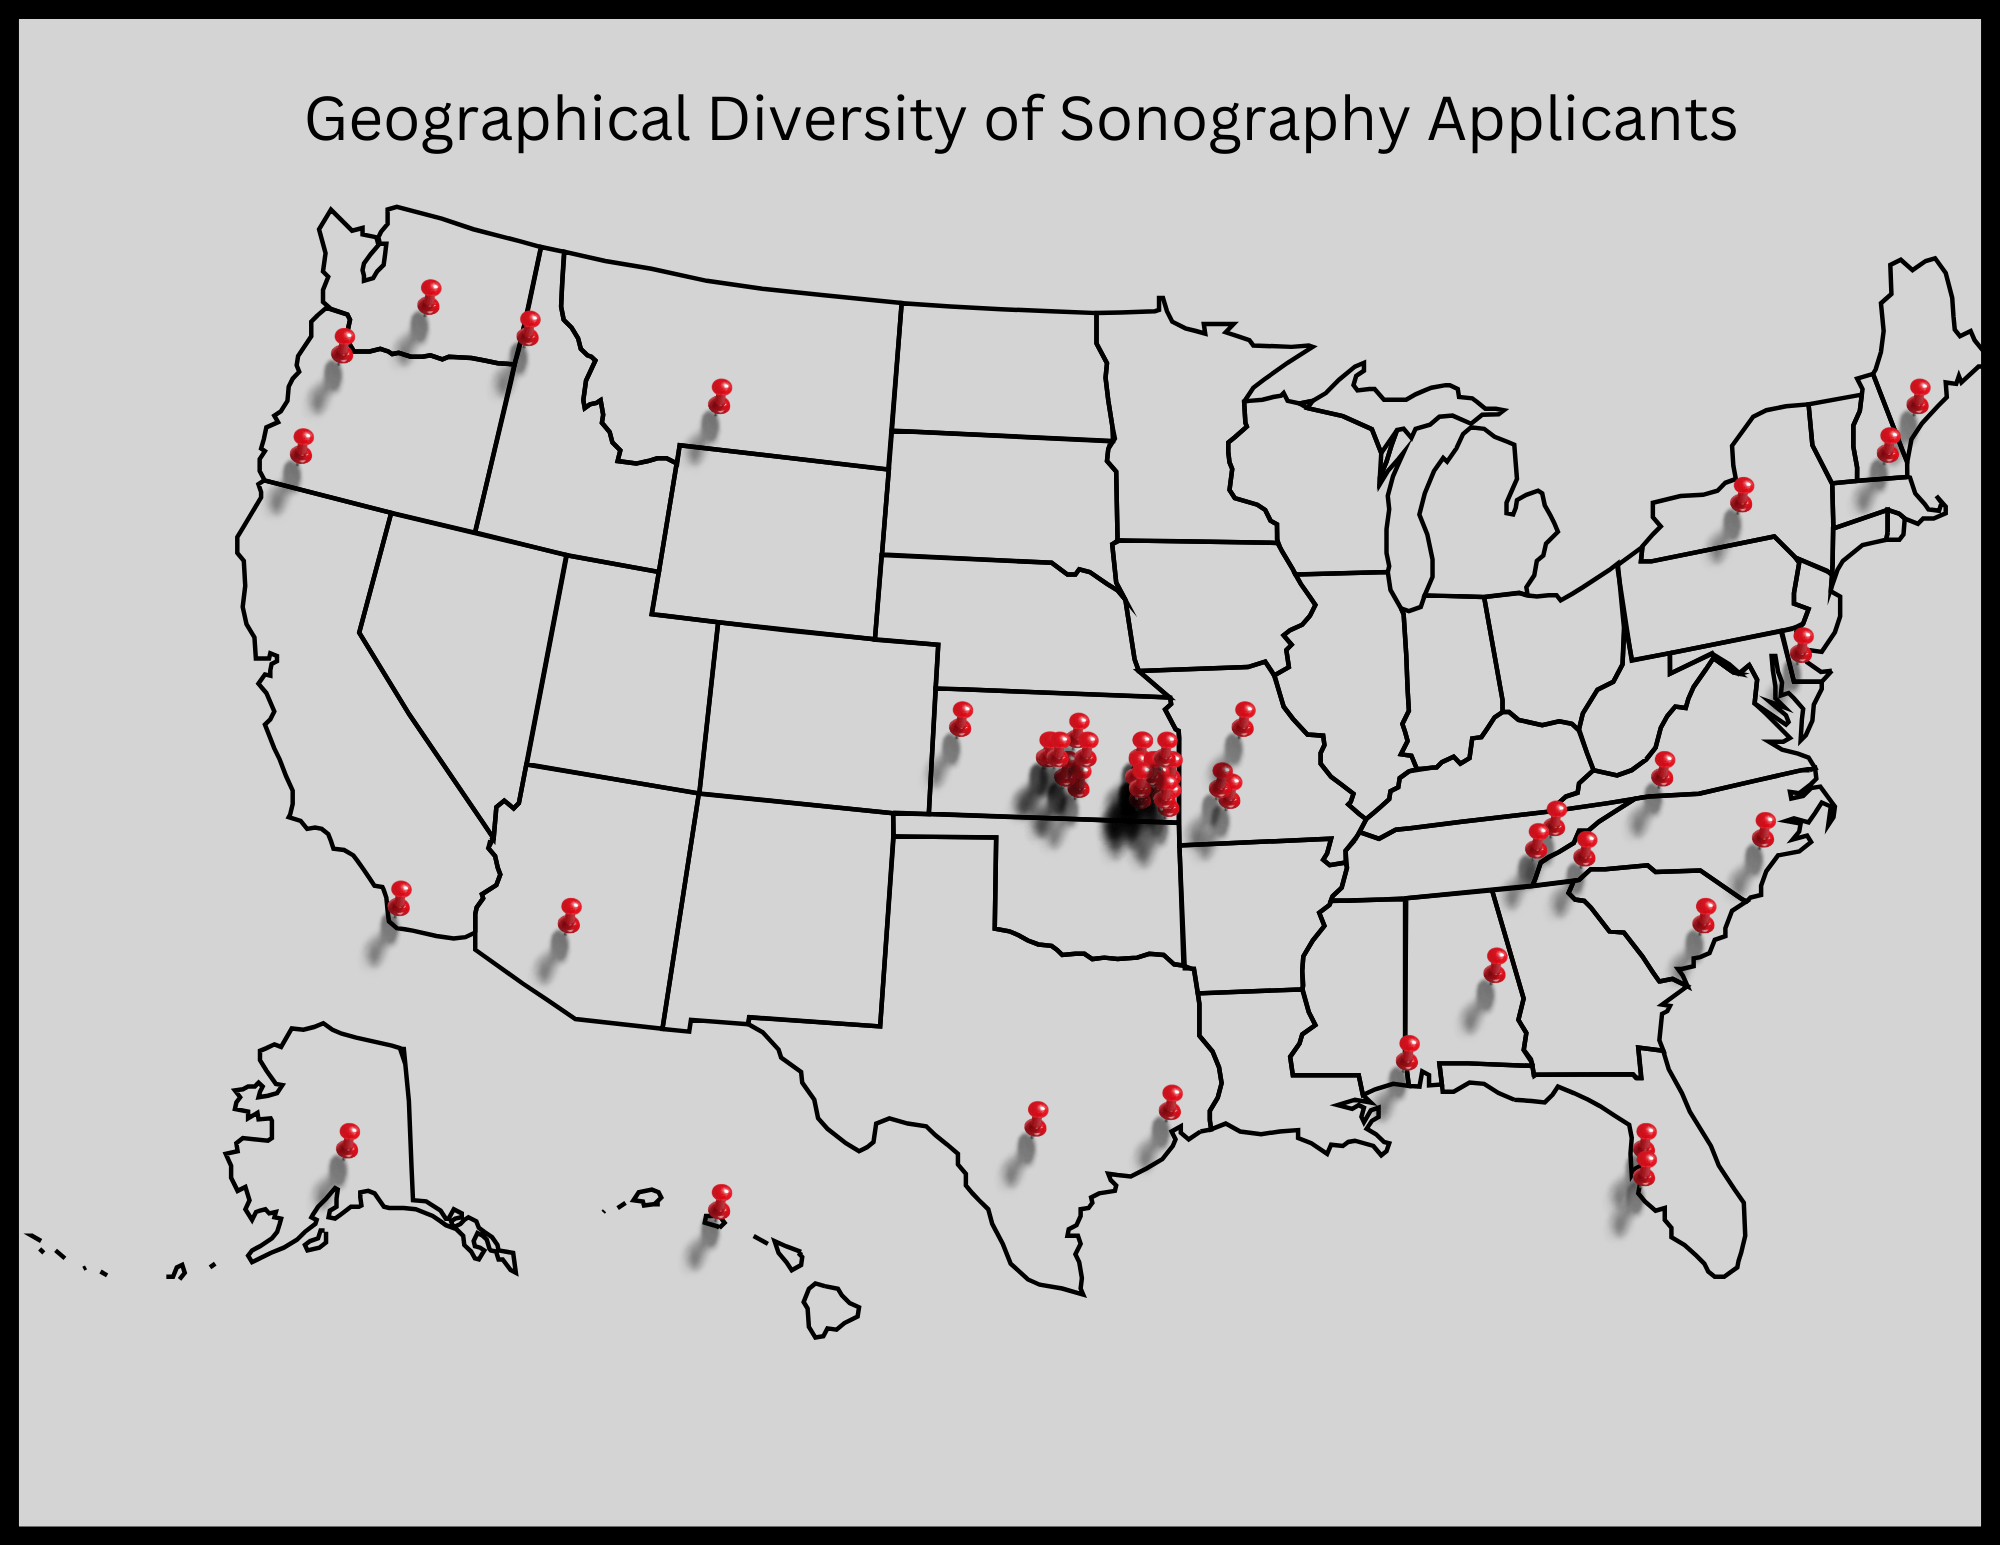 Geographical Diversity of Sonography Applicants